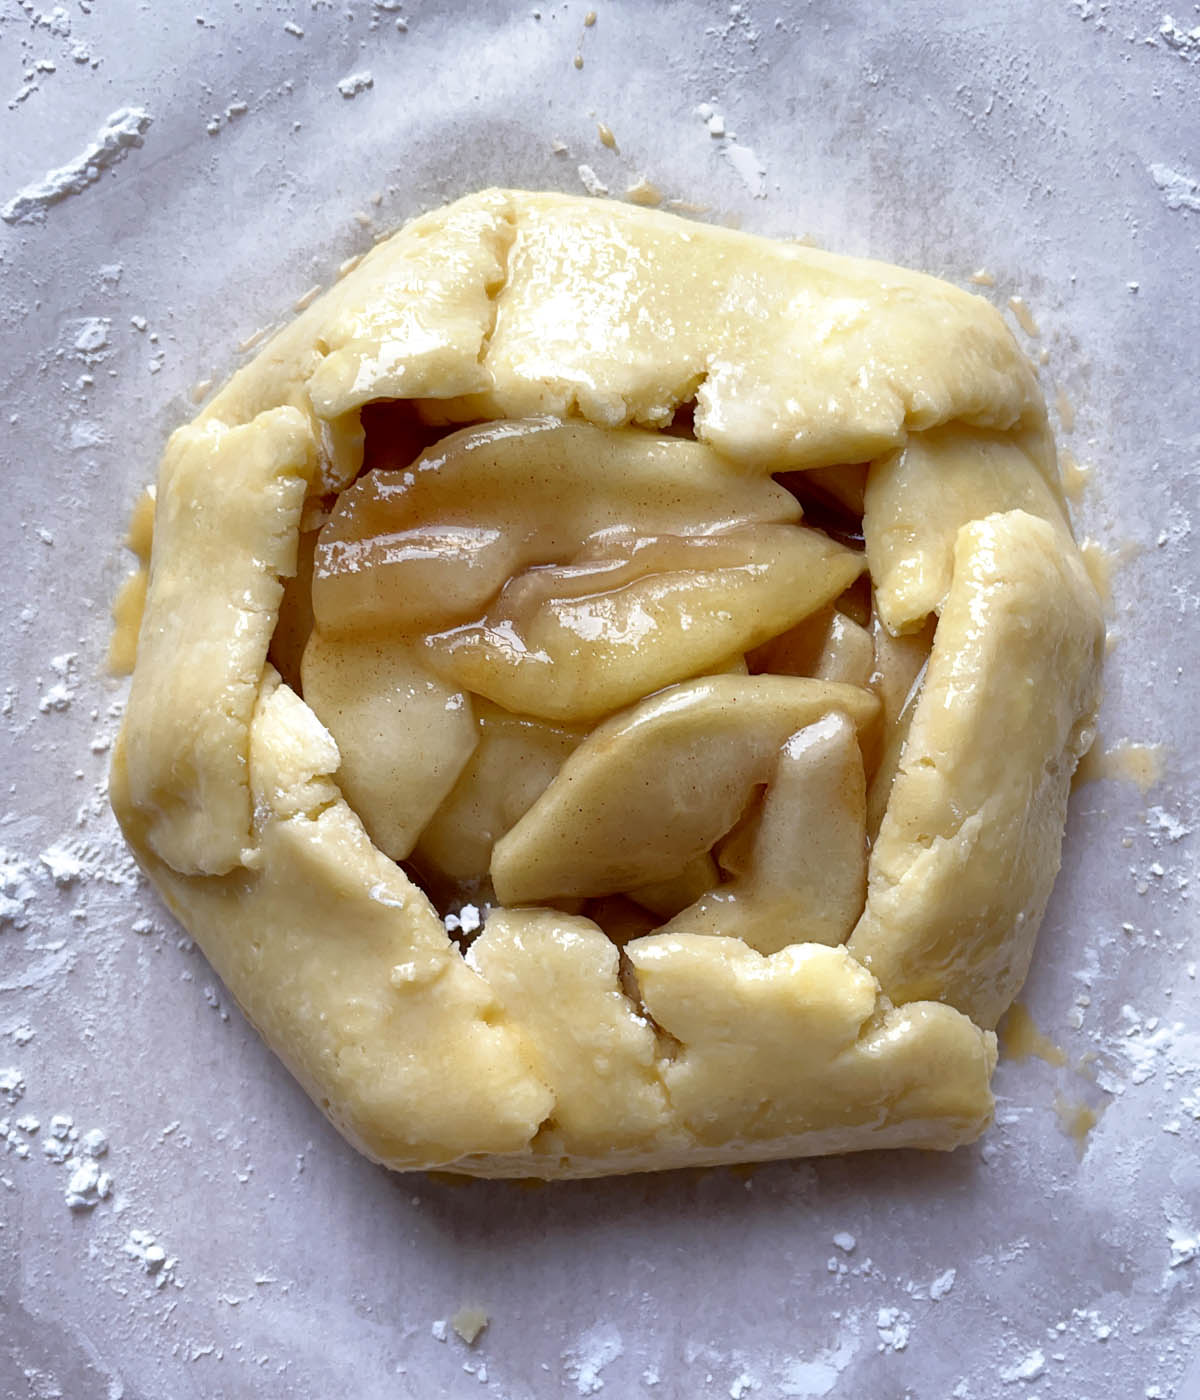 An uncooked roughly rounded apple galette with apples in the middle.